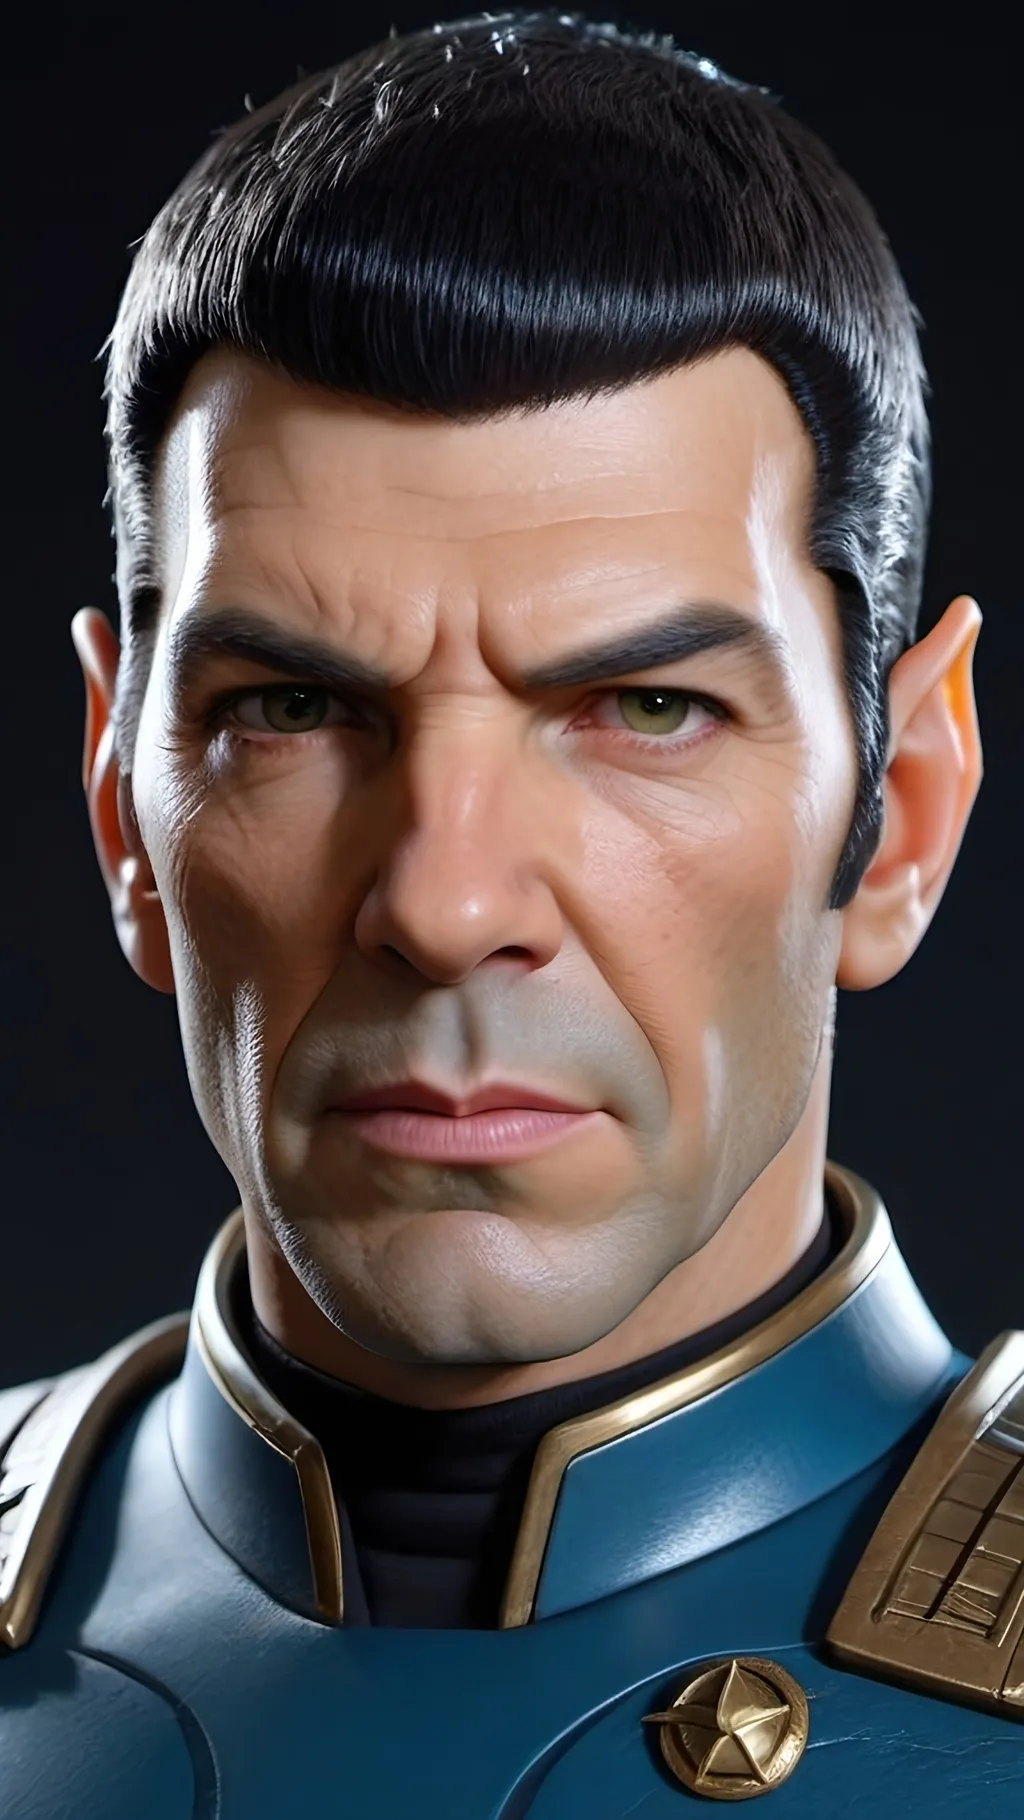 Prompt: Commander Spock, highly detailed very pointy ears, stoic demeanor, a born leader, intelligent vibe, Roman-inspired haircut, highly detailed Roman-inspired blue Starfleet armor, ornate, intricate design, highly detailed Starfleet communicator badges, realistic rank insignia, relaxed posture, dynamic posture, highly detailed face, highly detailed facial wrinkle texture, quizzical facial expression, highly detailed skin texture, highly detailed hair, highly detailed hair texture, highly detailed eyes, detailed iris texture, detailed pupils, highly detailed eyelashes, highly detailed eyebrows, highly detailed ears, highly detailed arms, relaxed arms, highly detailed hands, detailed mouth texture, relaxed hands, highly detailed fingers, detailed mouth, relaxed mouths, highly detailed teeth, highly detailed futuristic starship, futuristic Roman-inspired design, marble and acrylic materials, cinematic quality, dynamic composition, unique visual narrative, dramatic angles, diffuse professional lighting, opulent, splendid, subdued color scheme, sci-fi, futuristic, detailed architecture, grand scale, professional atmospheric lighting, warlike vibe, 